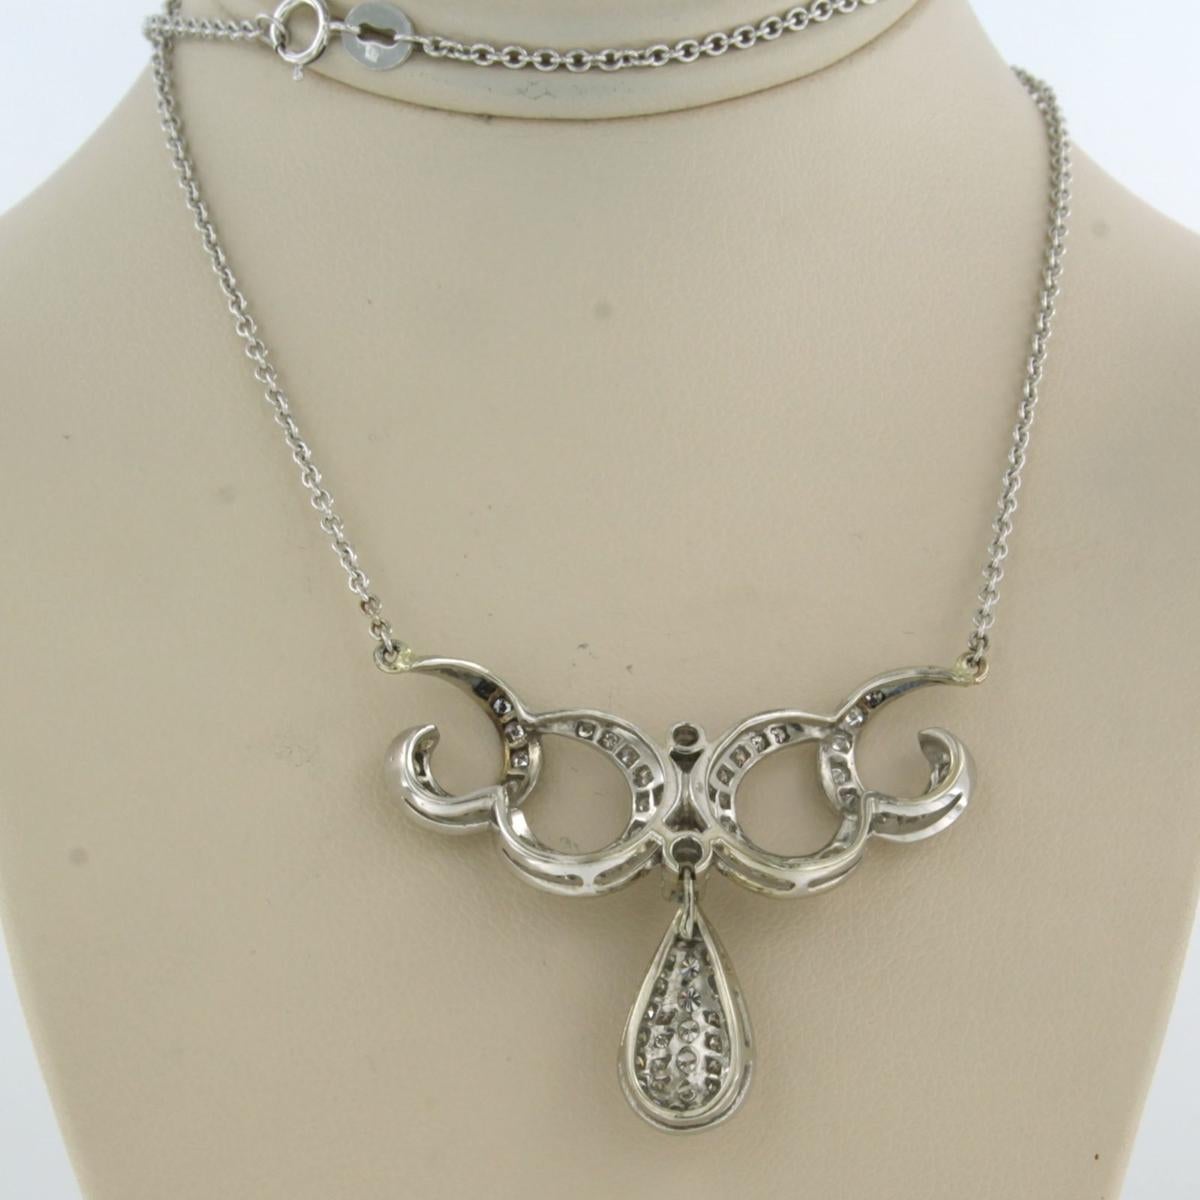 Women's Neclace with diamonds 18k white gold and platinum